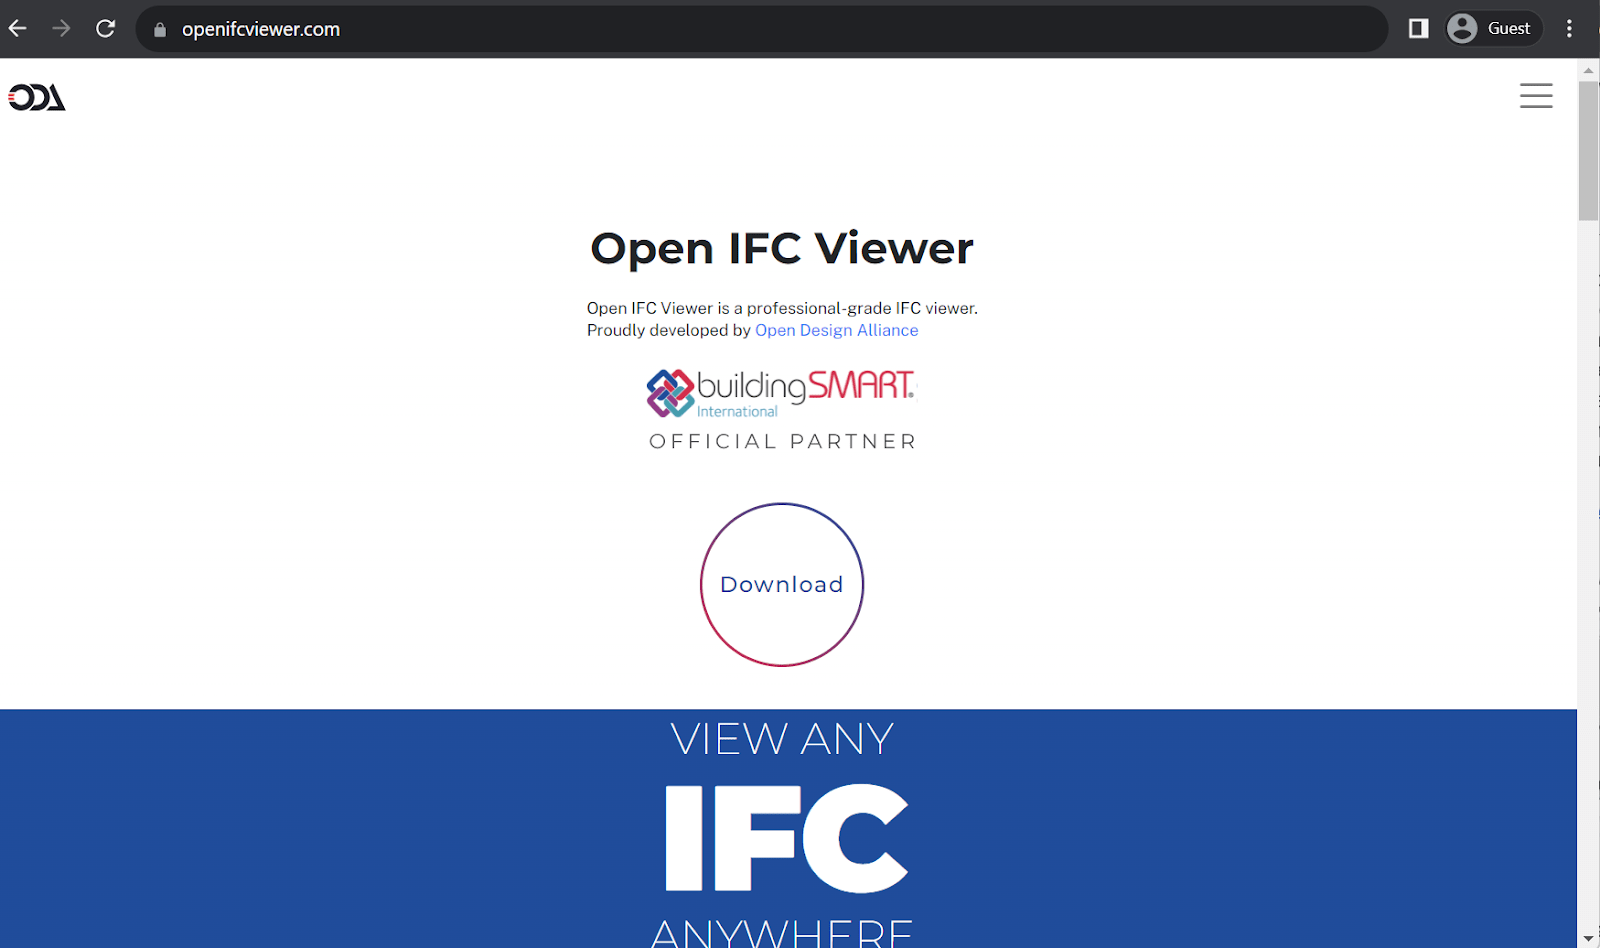 Open IFC Viewer landing page